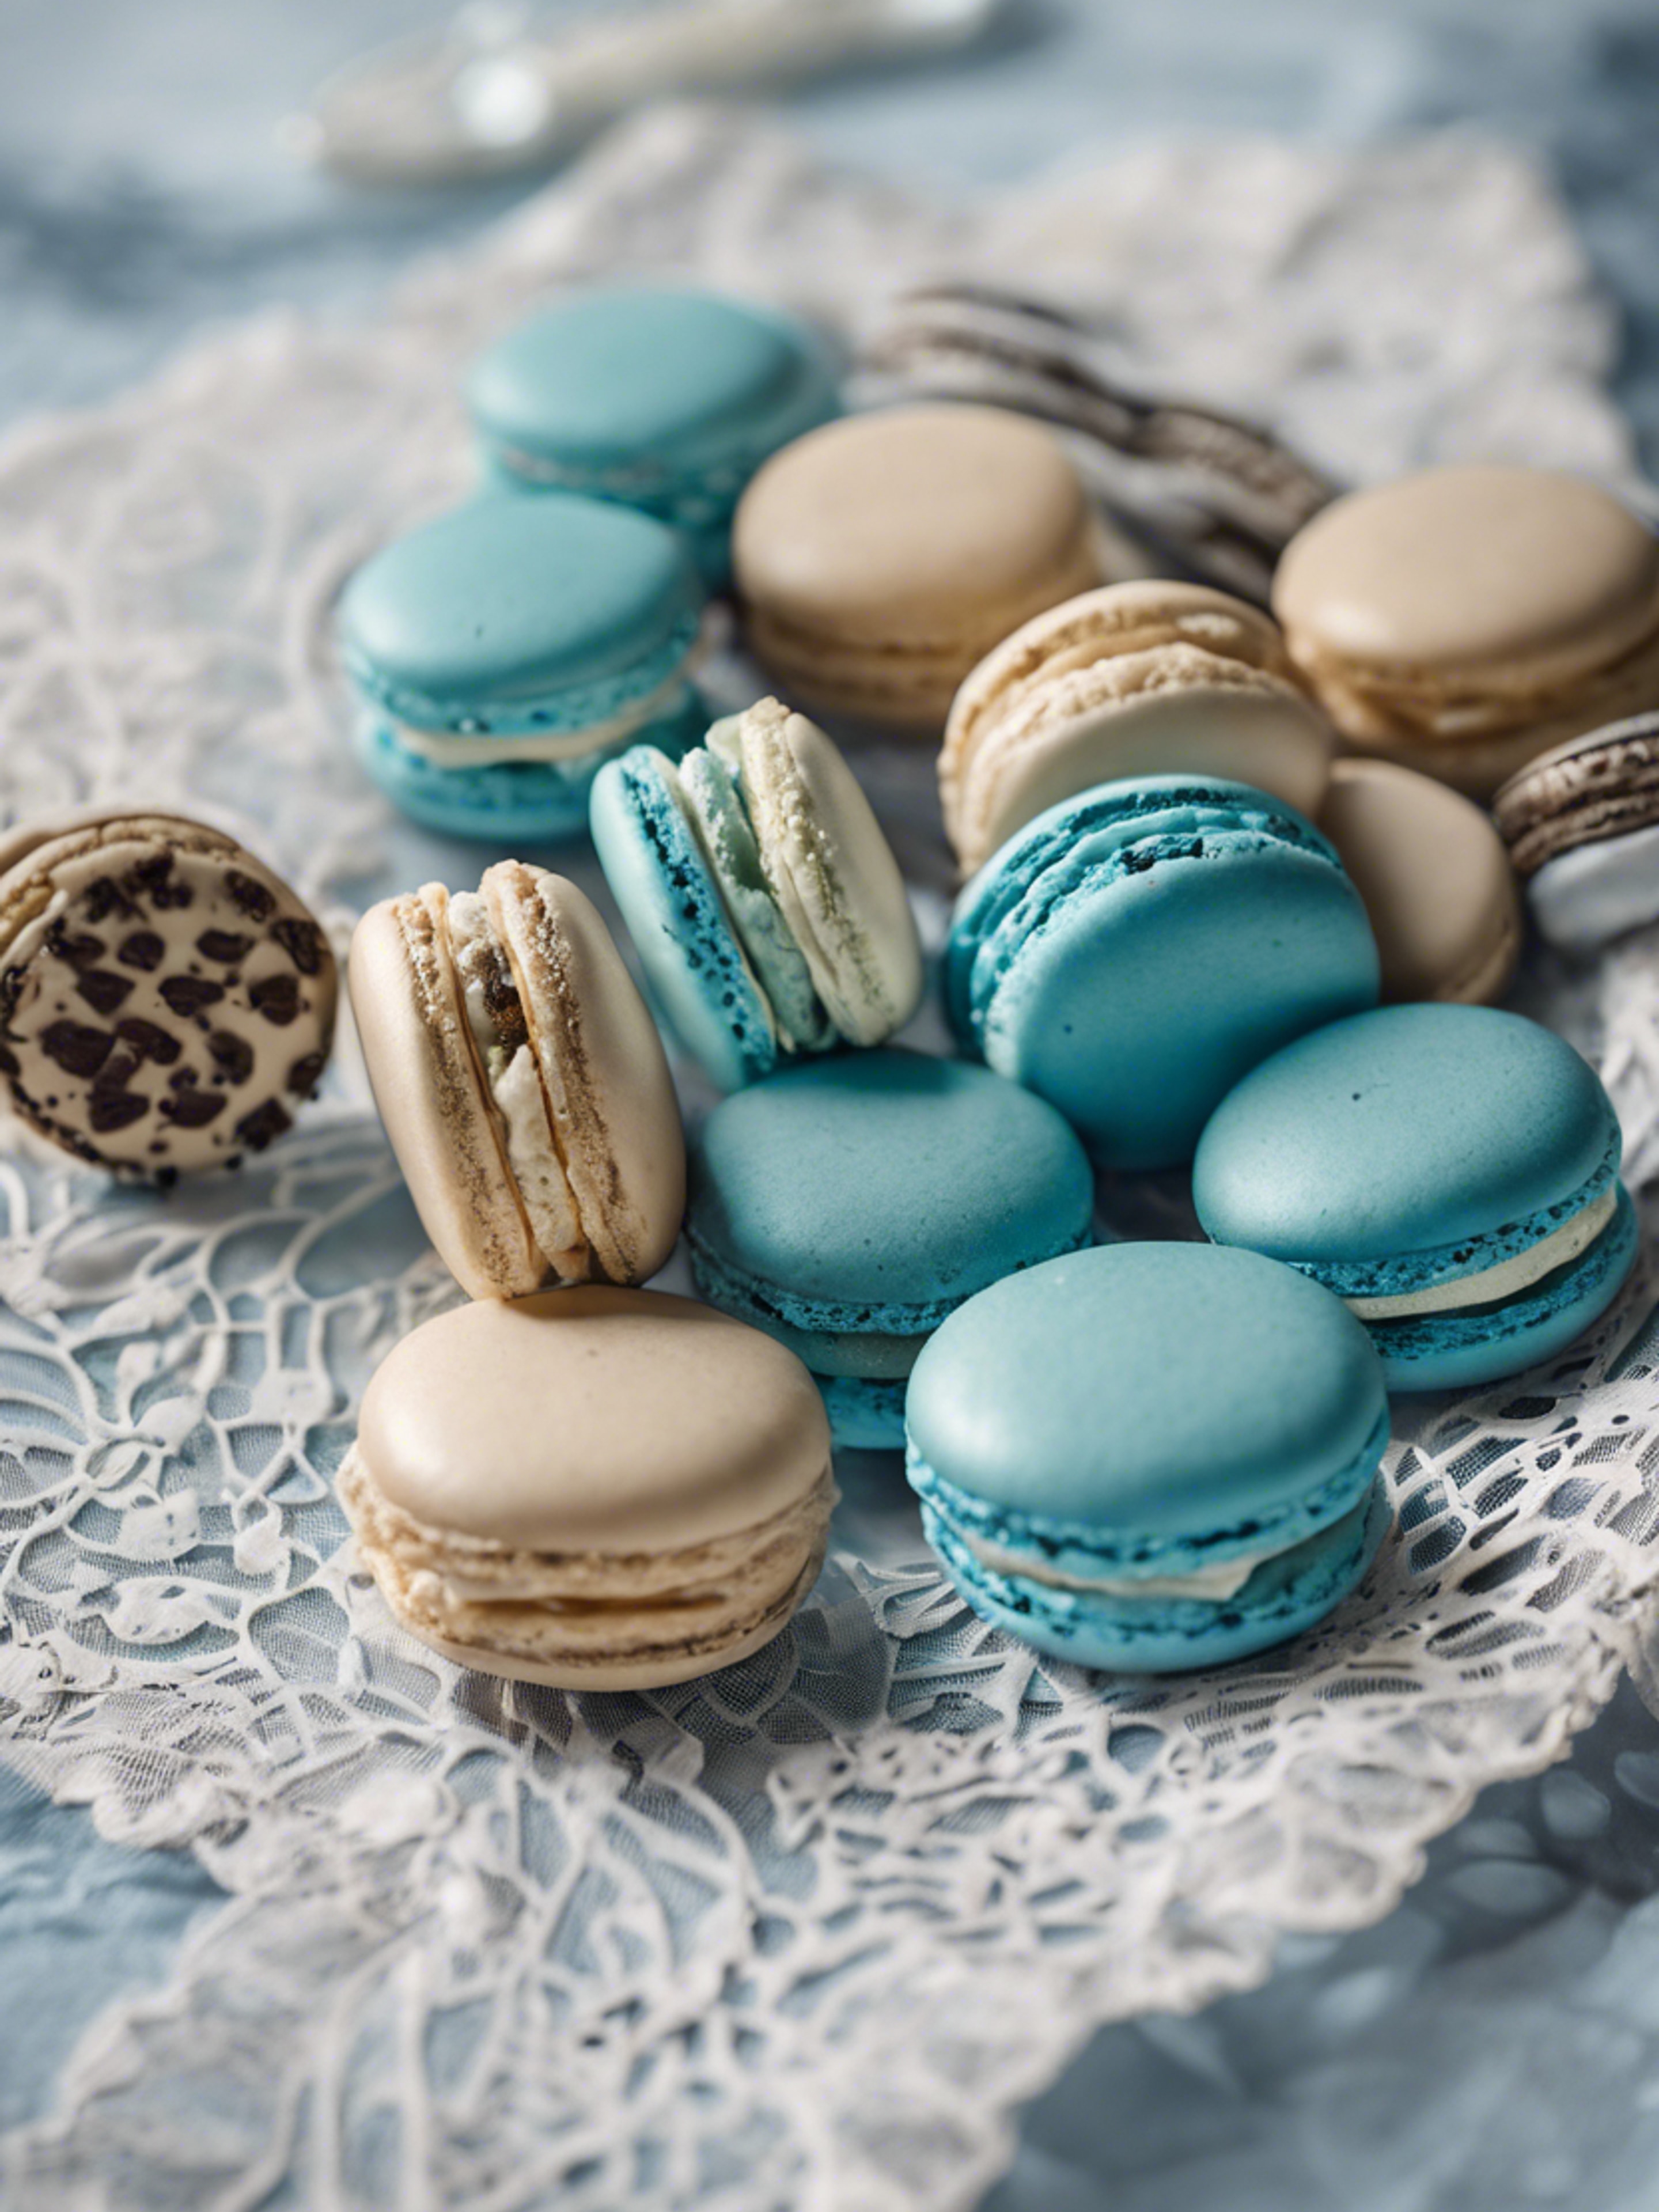 Blue French Macarons artistically arranged on an antique white lace tablecloth. Tapeta[73469cabdbbf44728762]